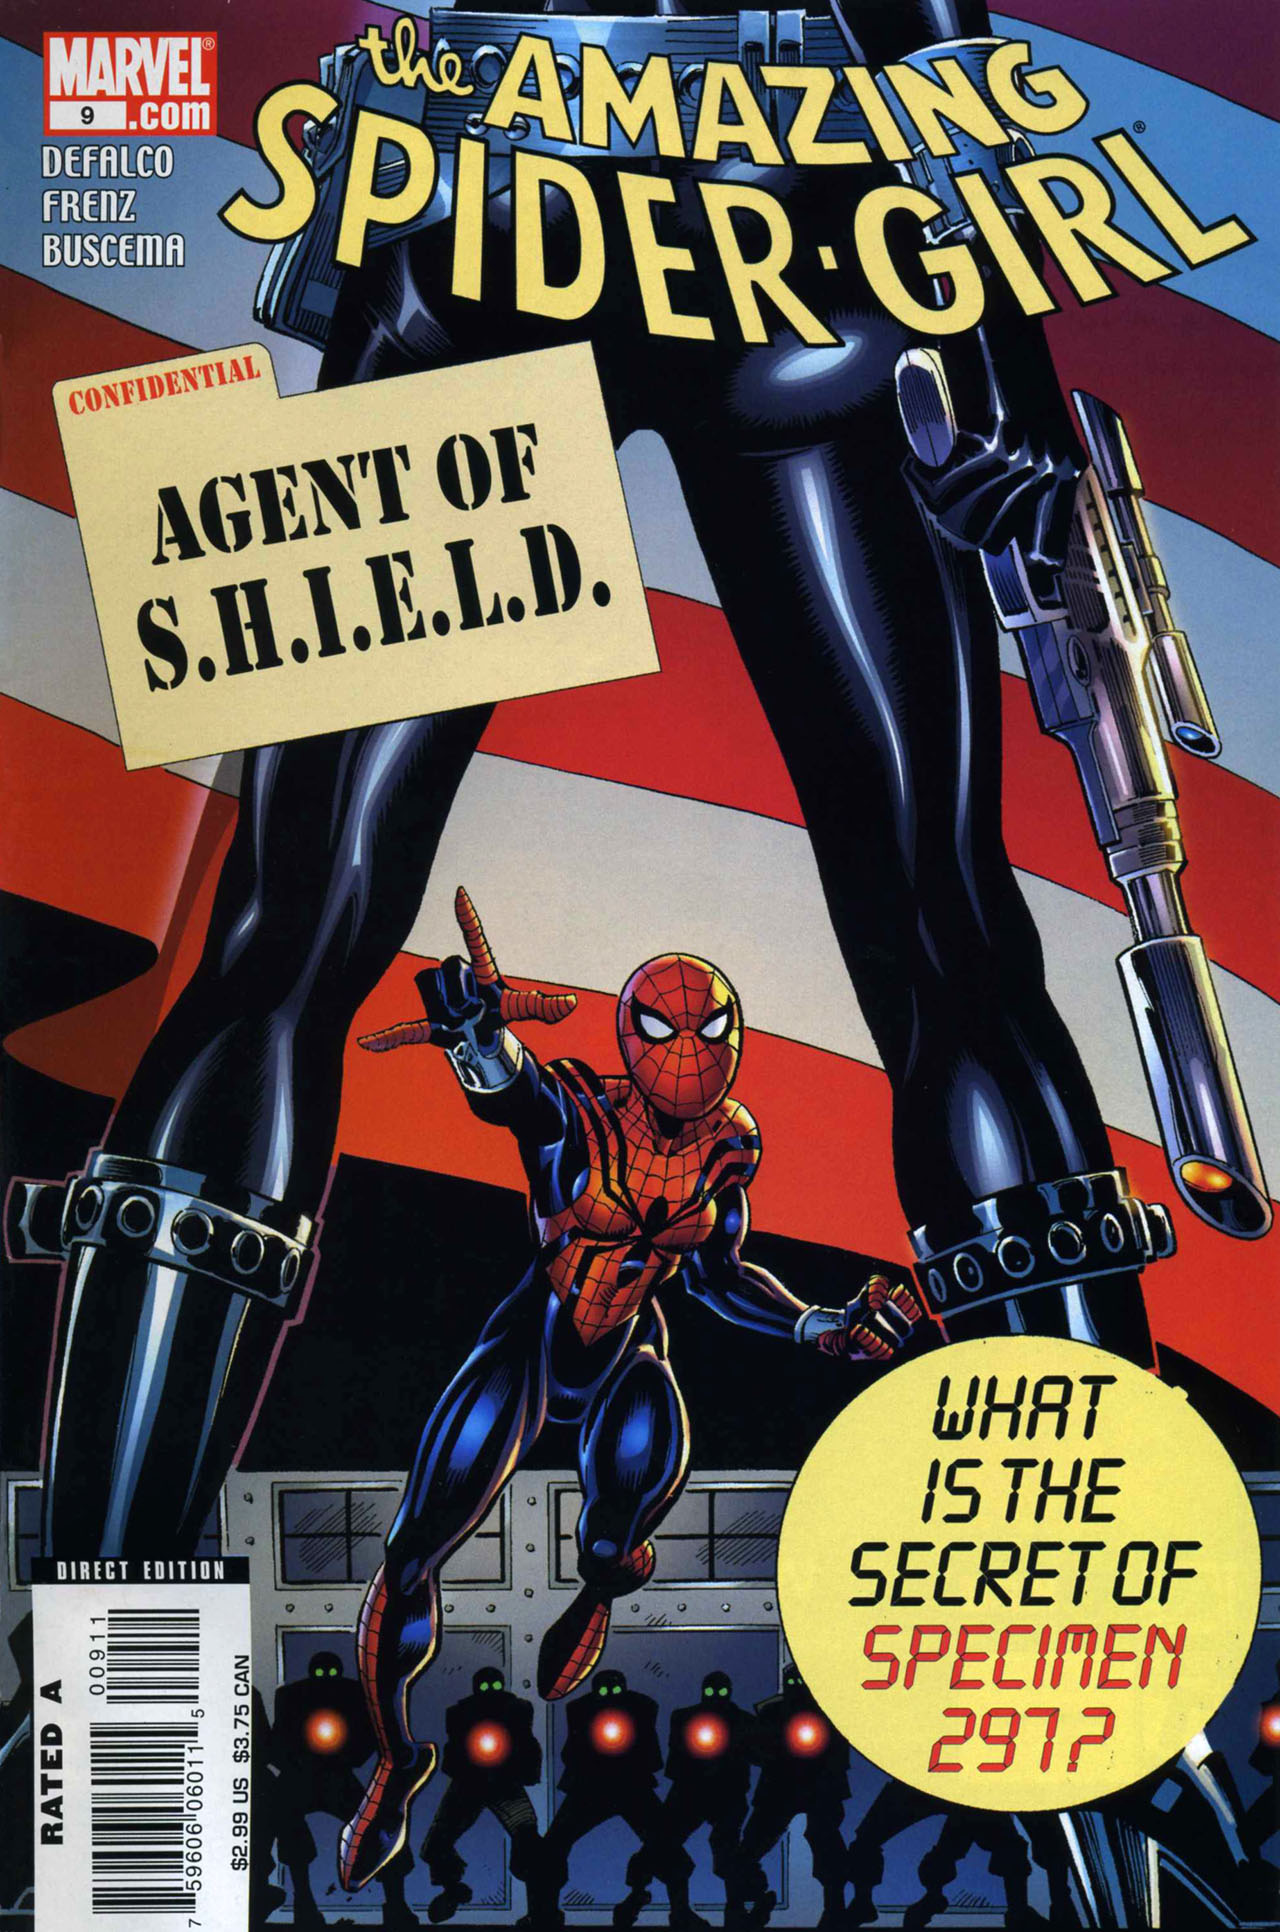 Read online Amazing Spider-Girl comic -  Issue #9 - 1